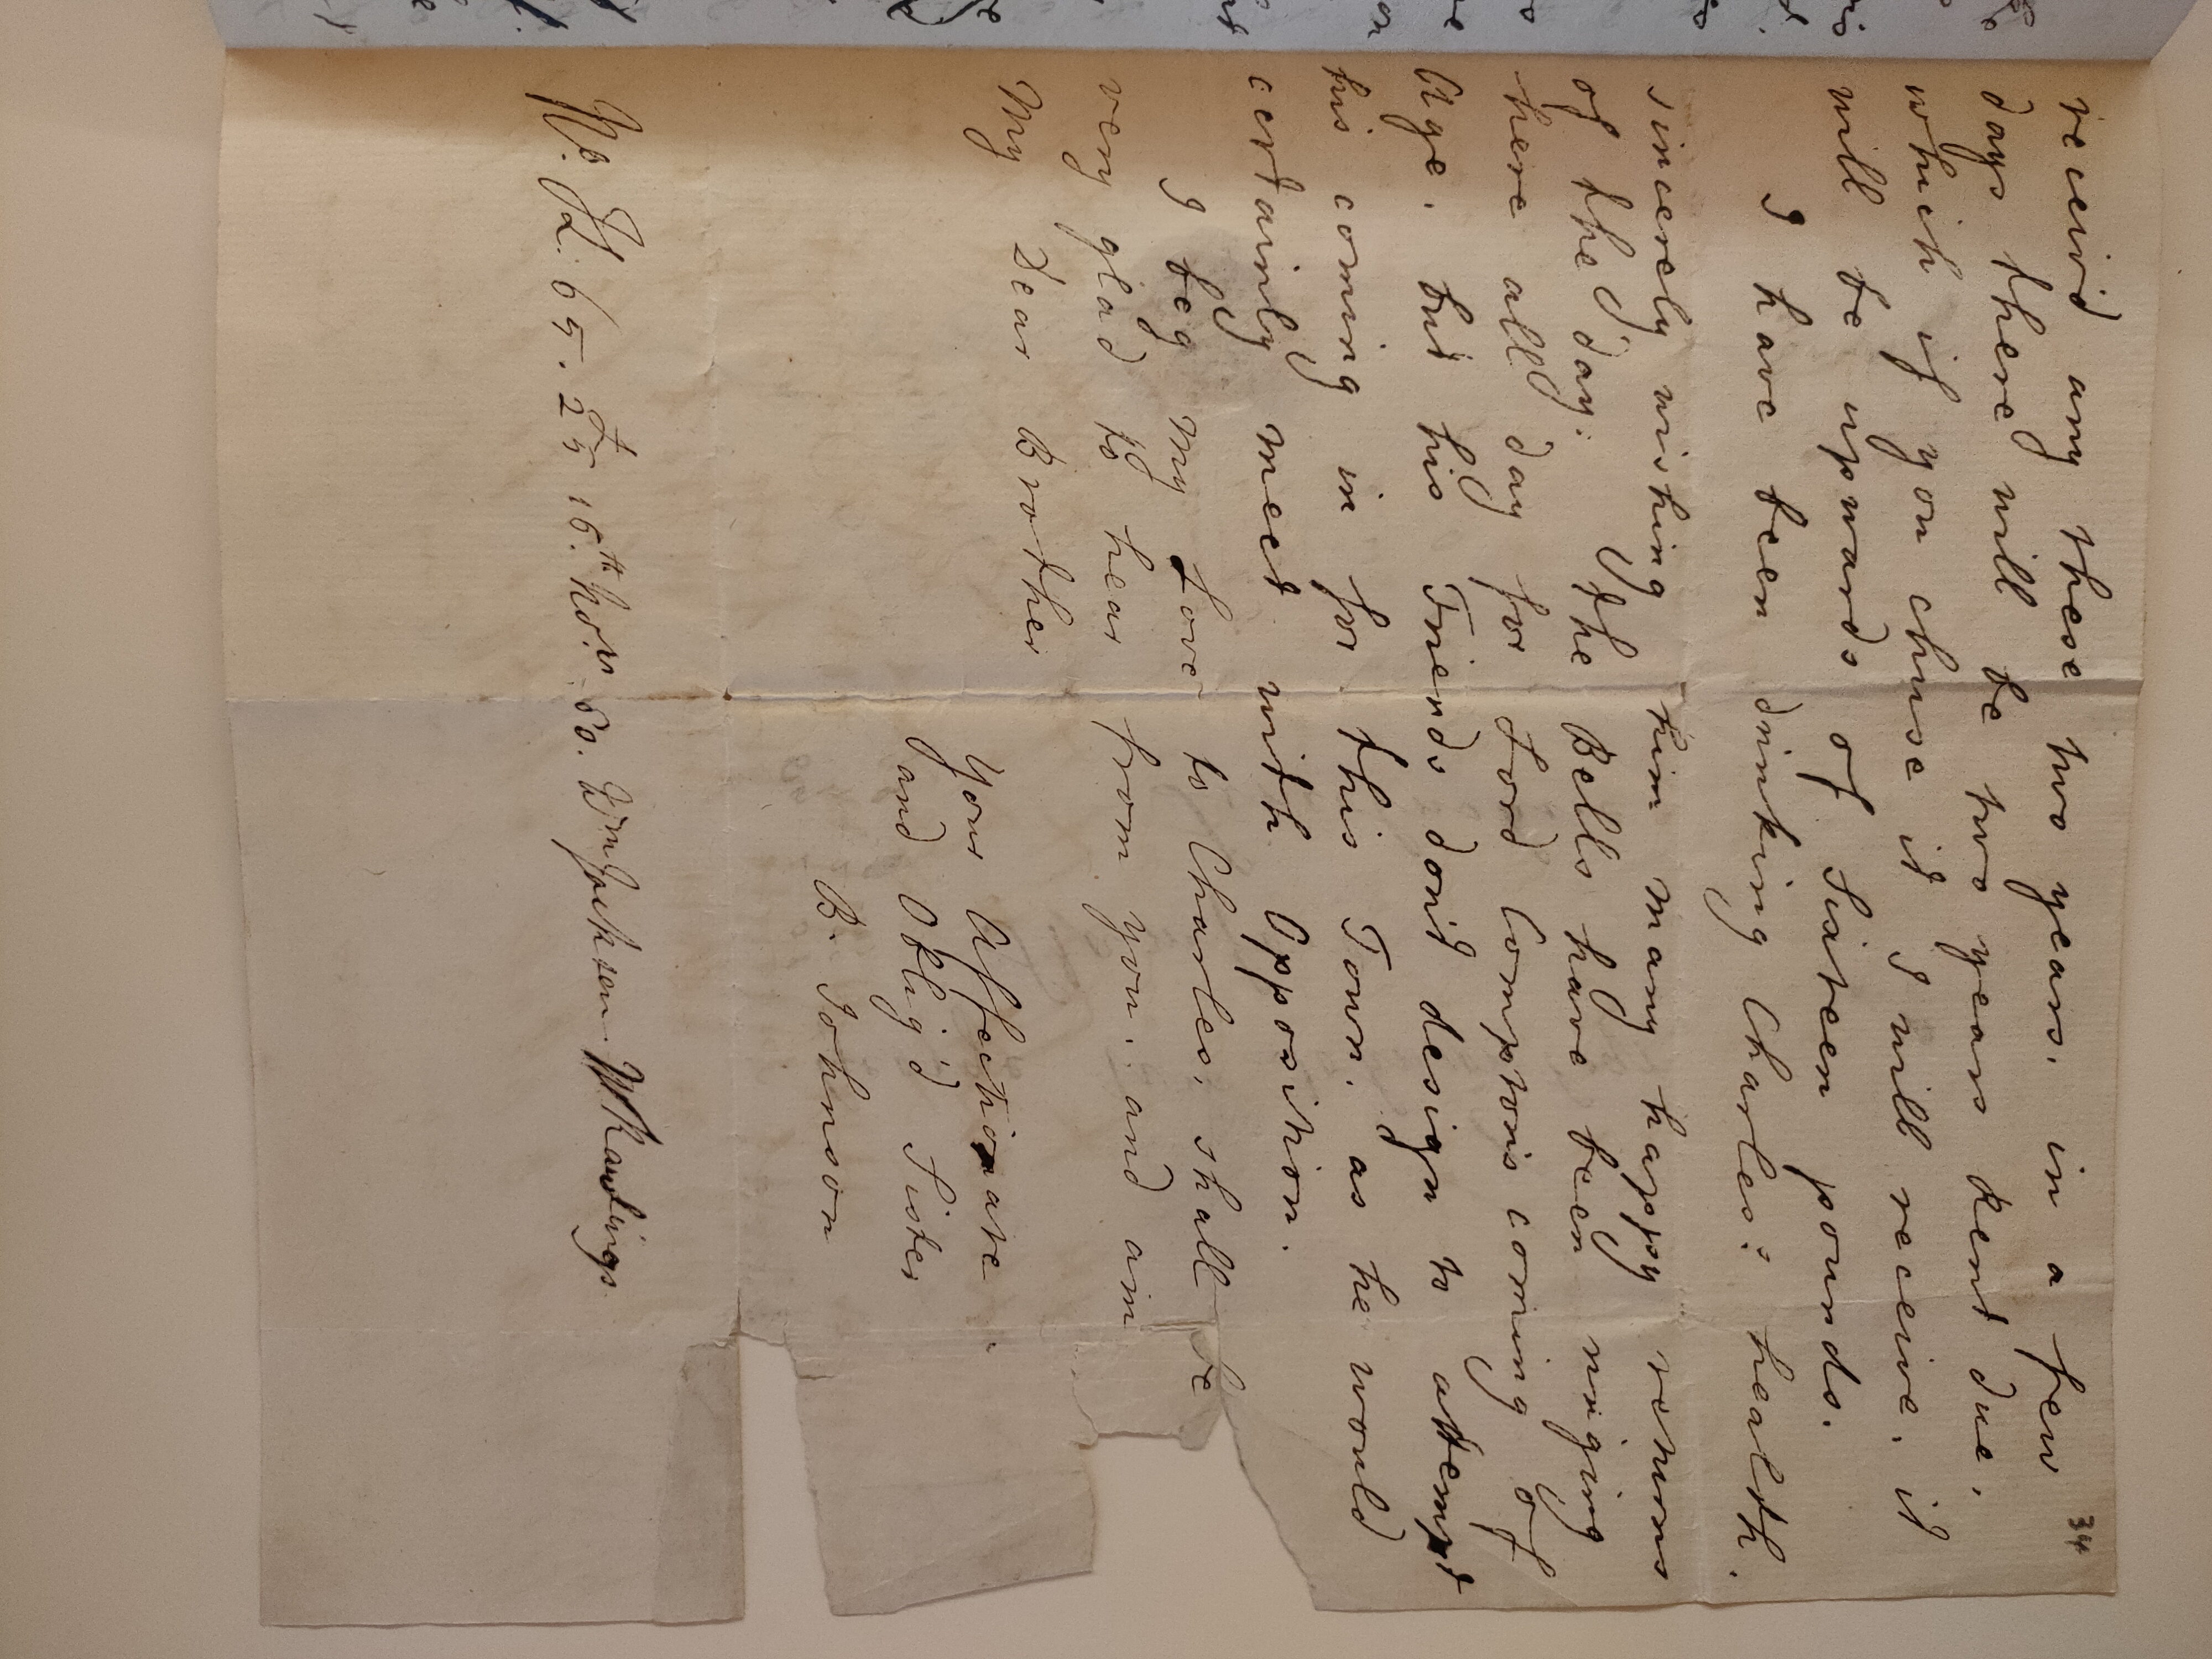 Image #3 of letter: Barbara Johnson to George William Johnson, 21 March 1780